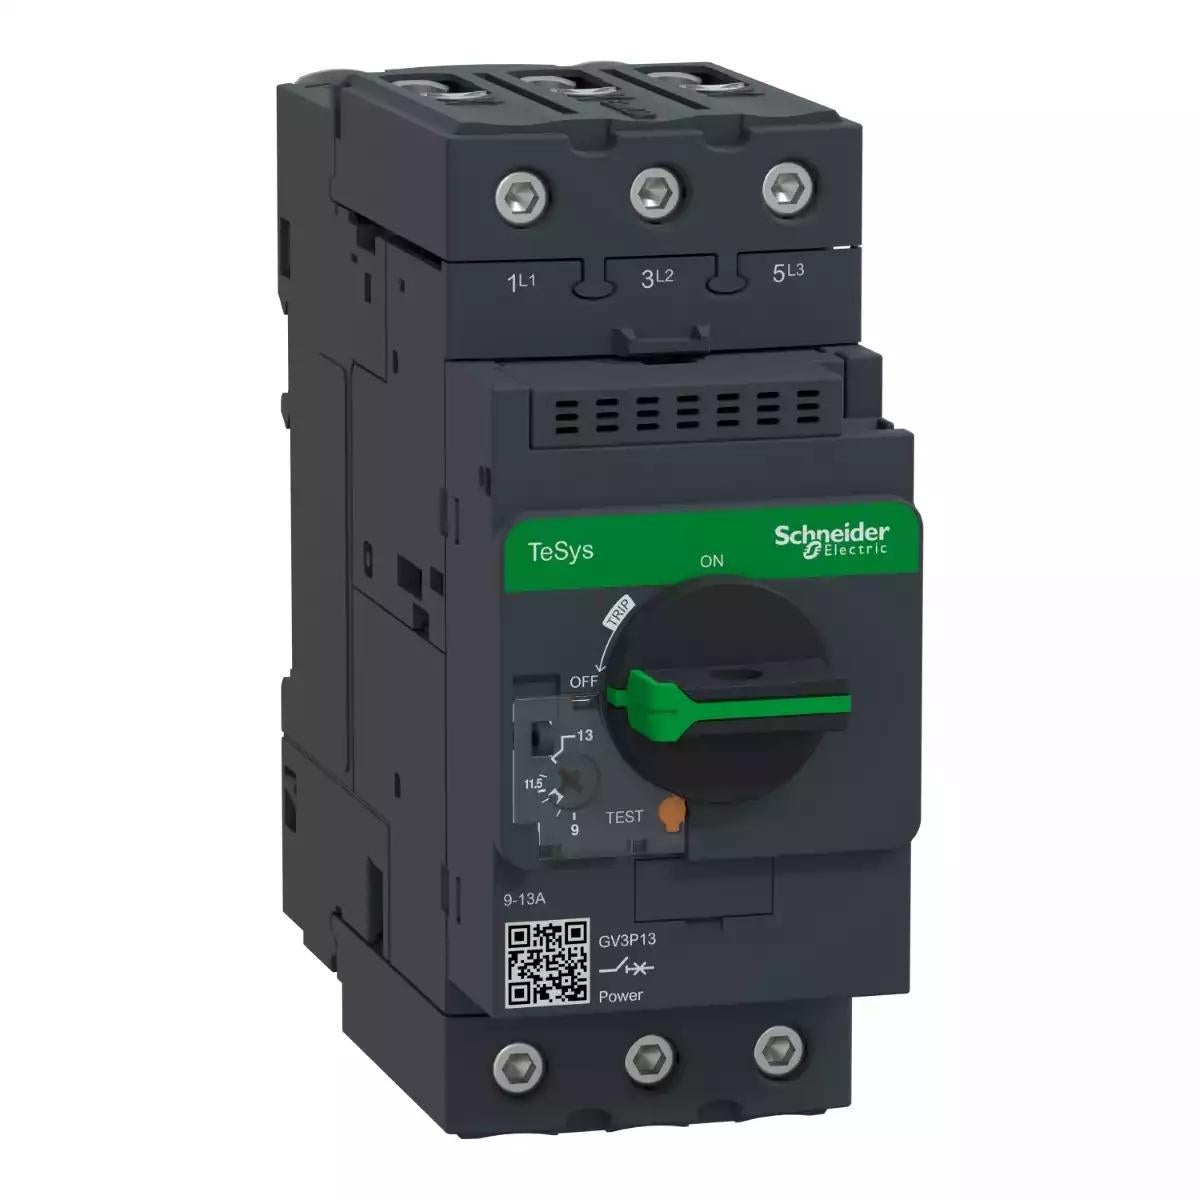 Schneider Electric TeSys GV3 - Circuit breaker - thermal-magnetic - 9â€¦13A - EverLink BTR connectors